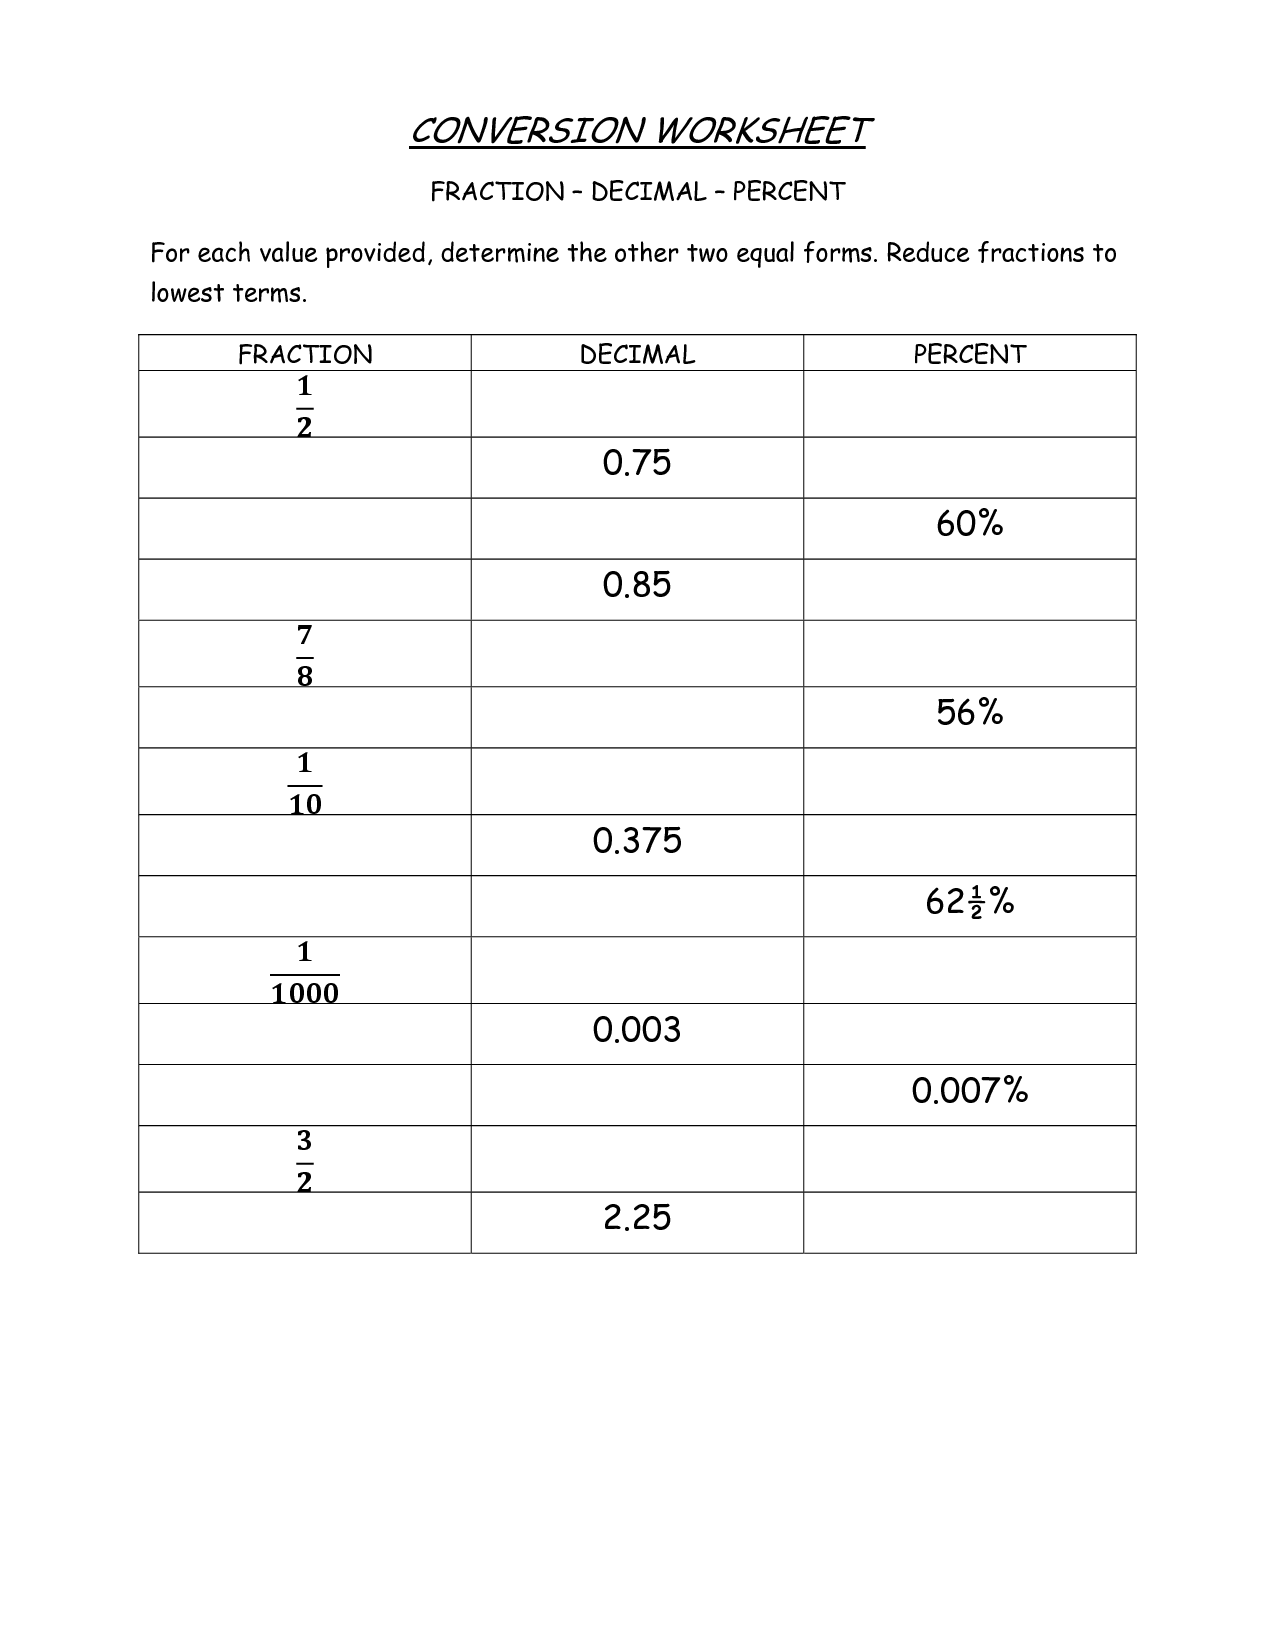 Converting Fractions Decimals And Percents Worksheets The Best